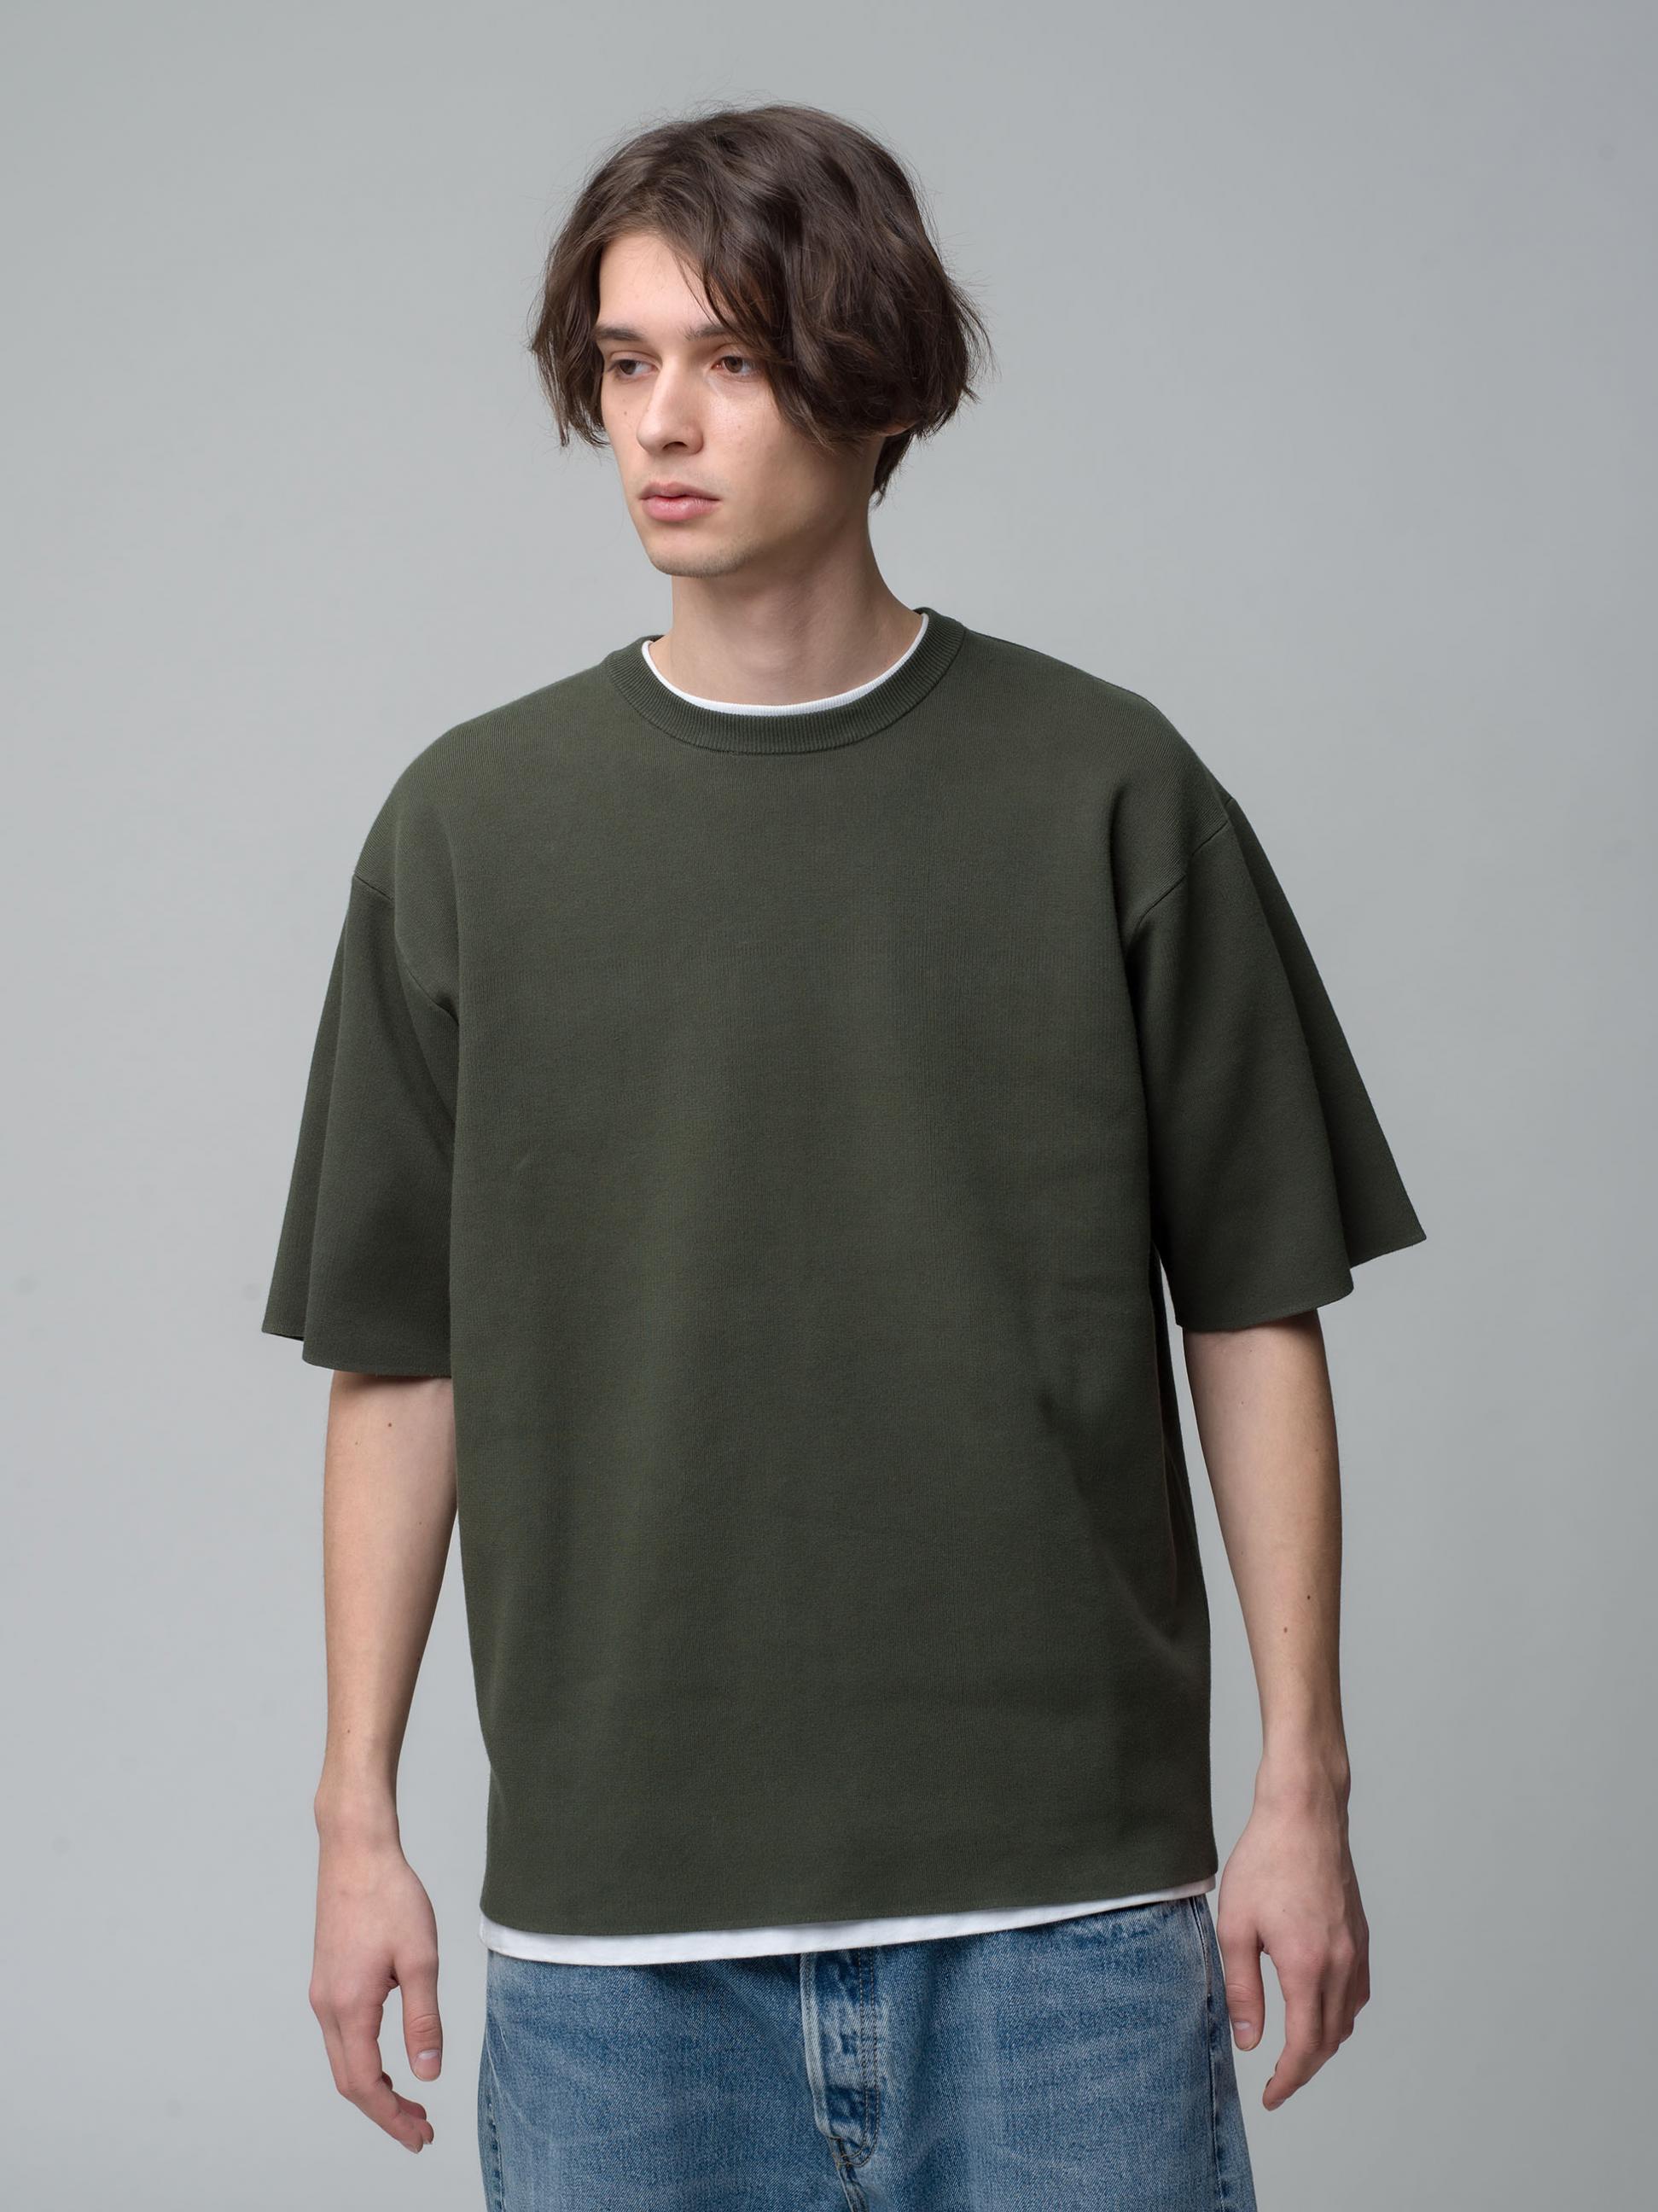 Smooth Knit T-Shirts